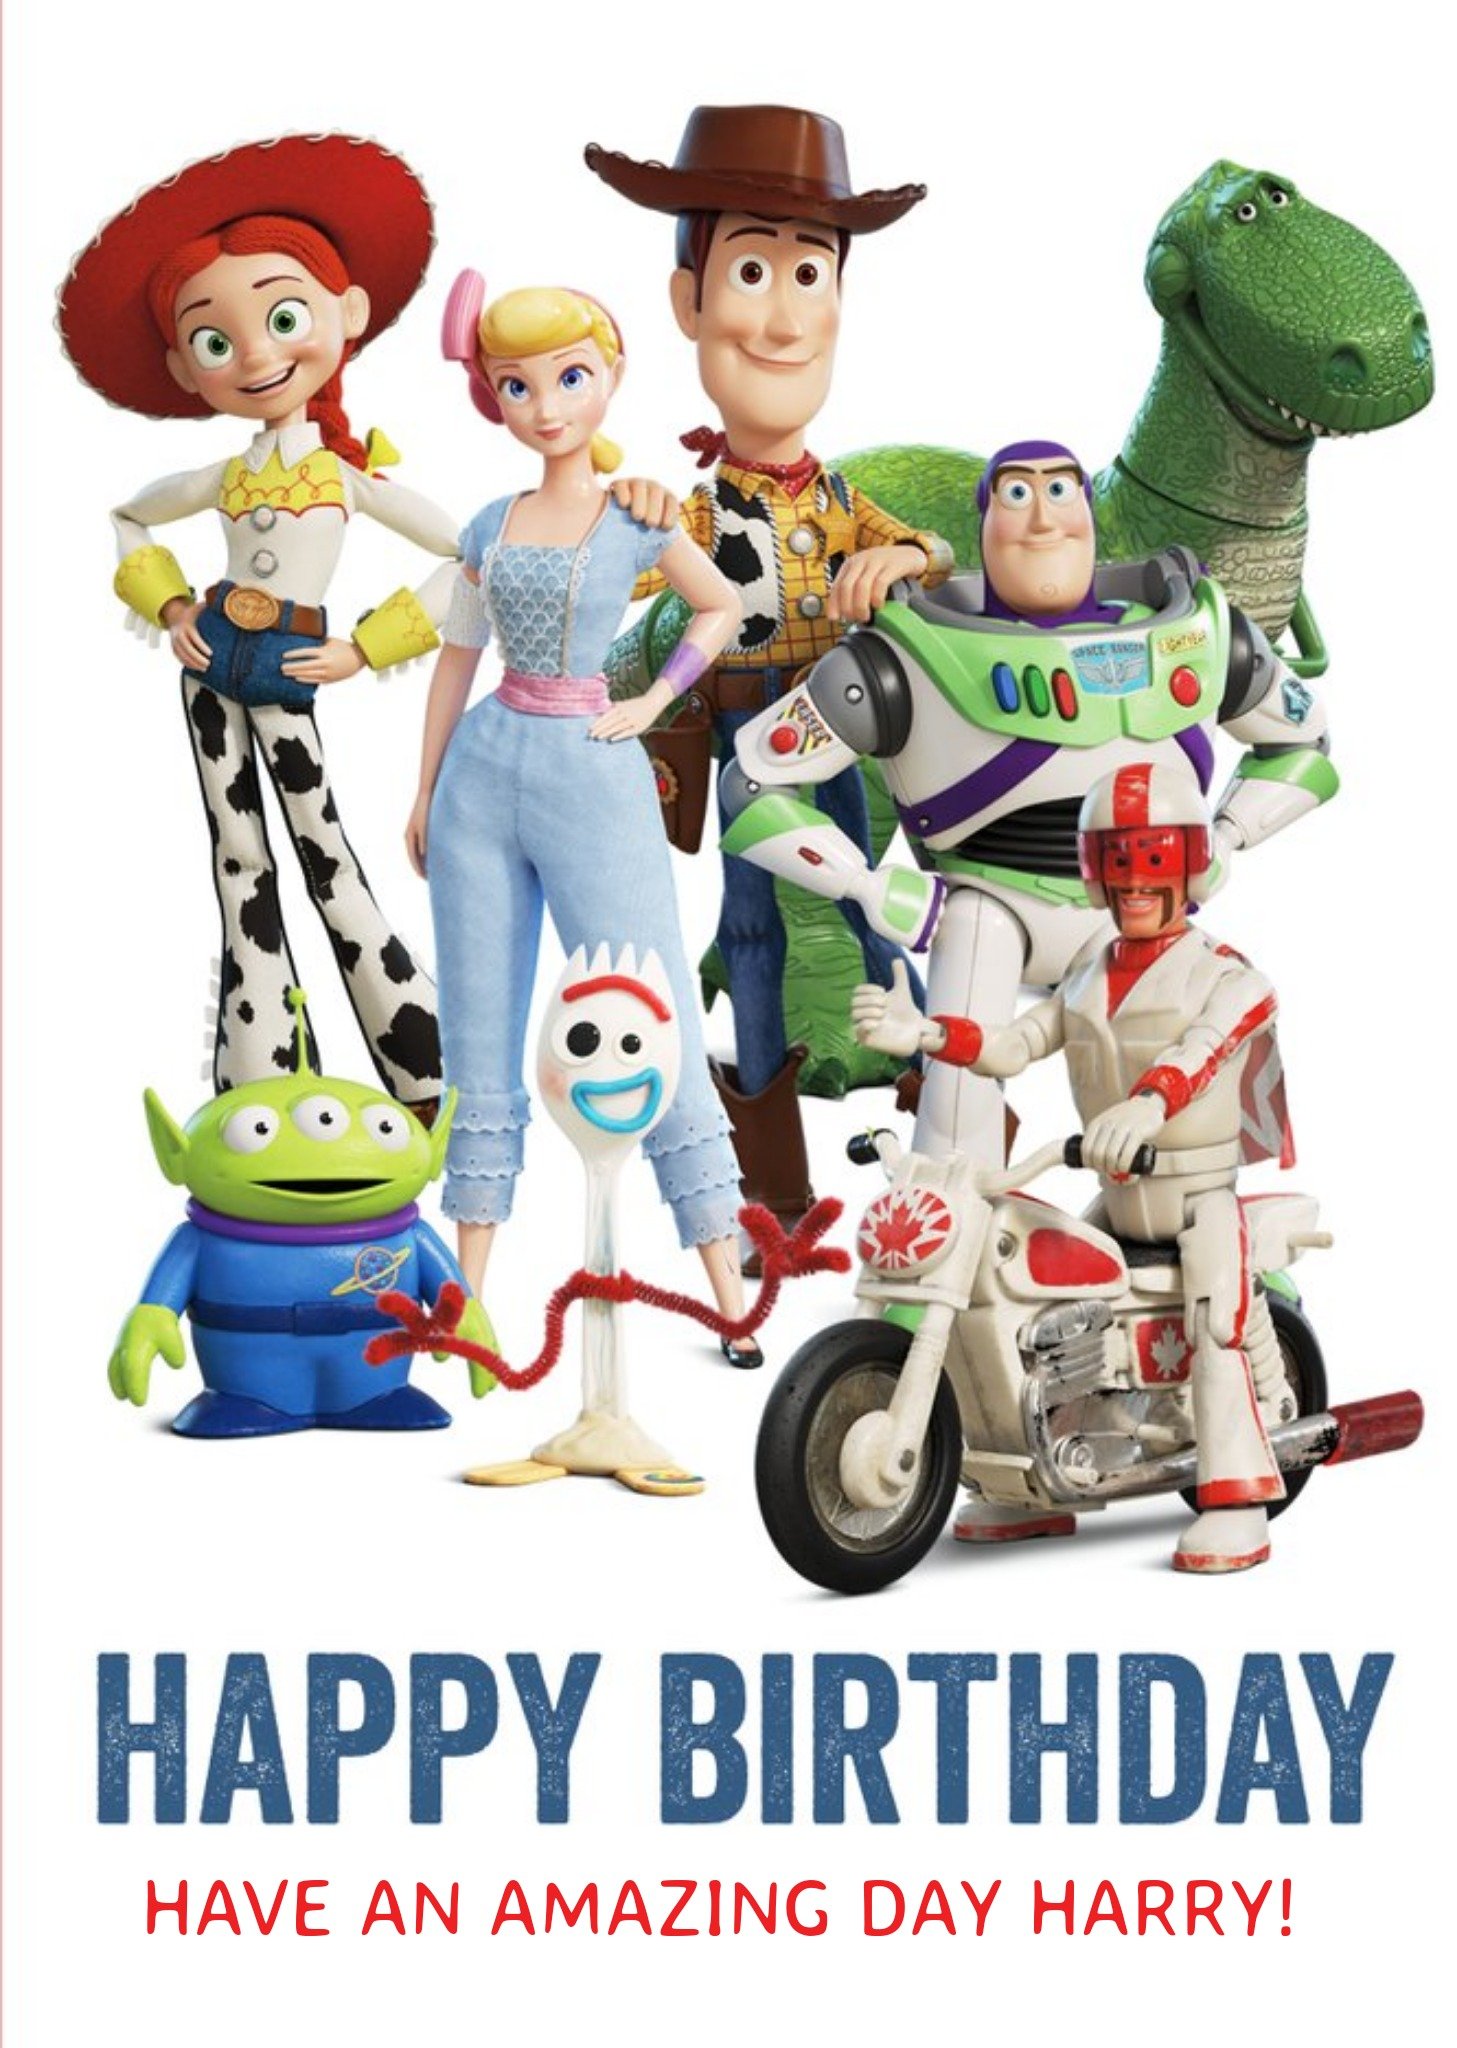 Toy Story 4 Characters - Birthday Card Ecard